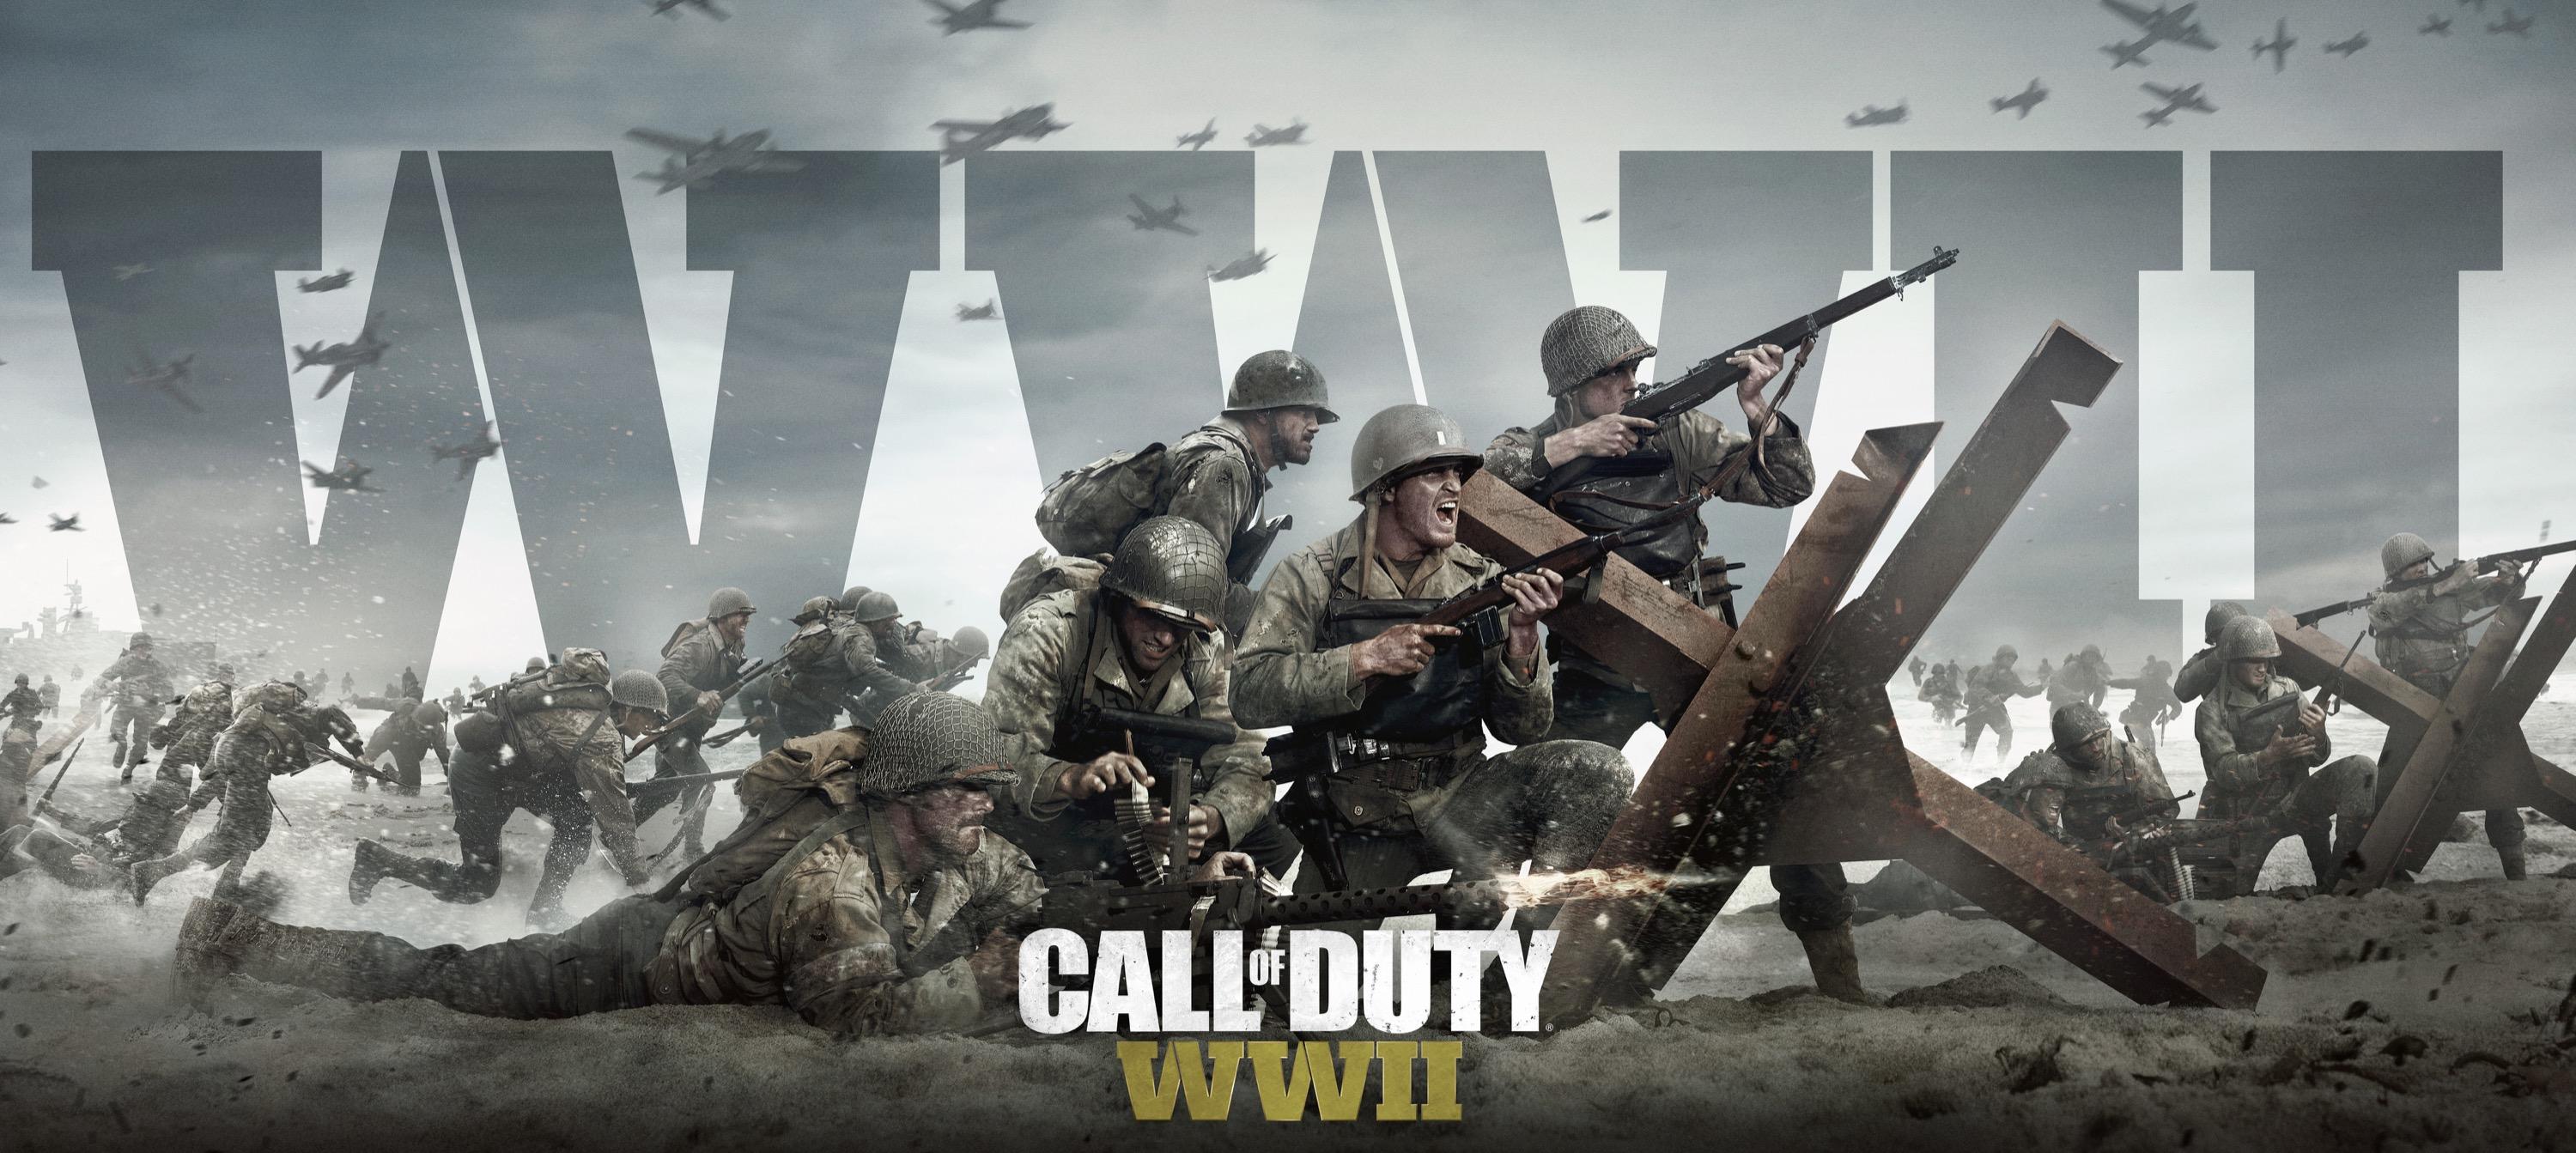 Wallpaper Call of Duty WWII, HD, Games